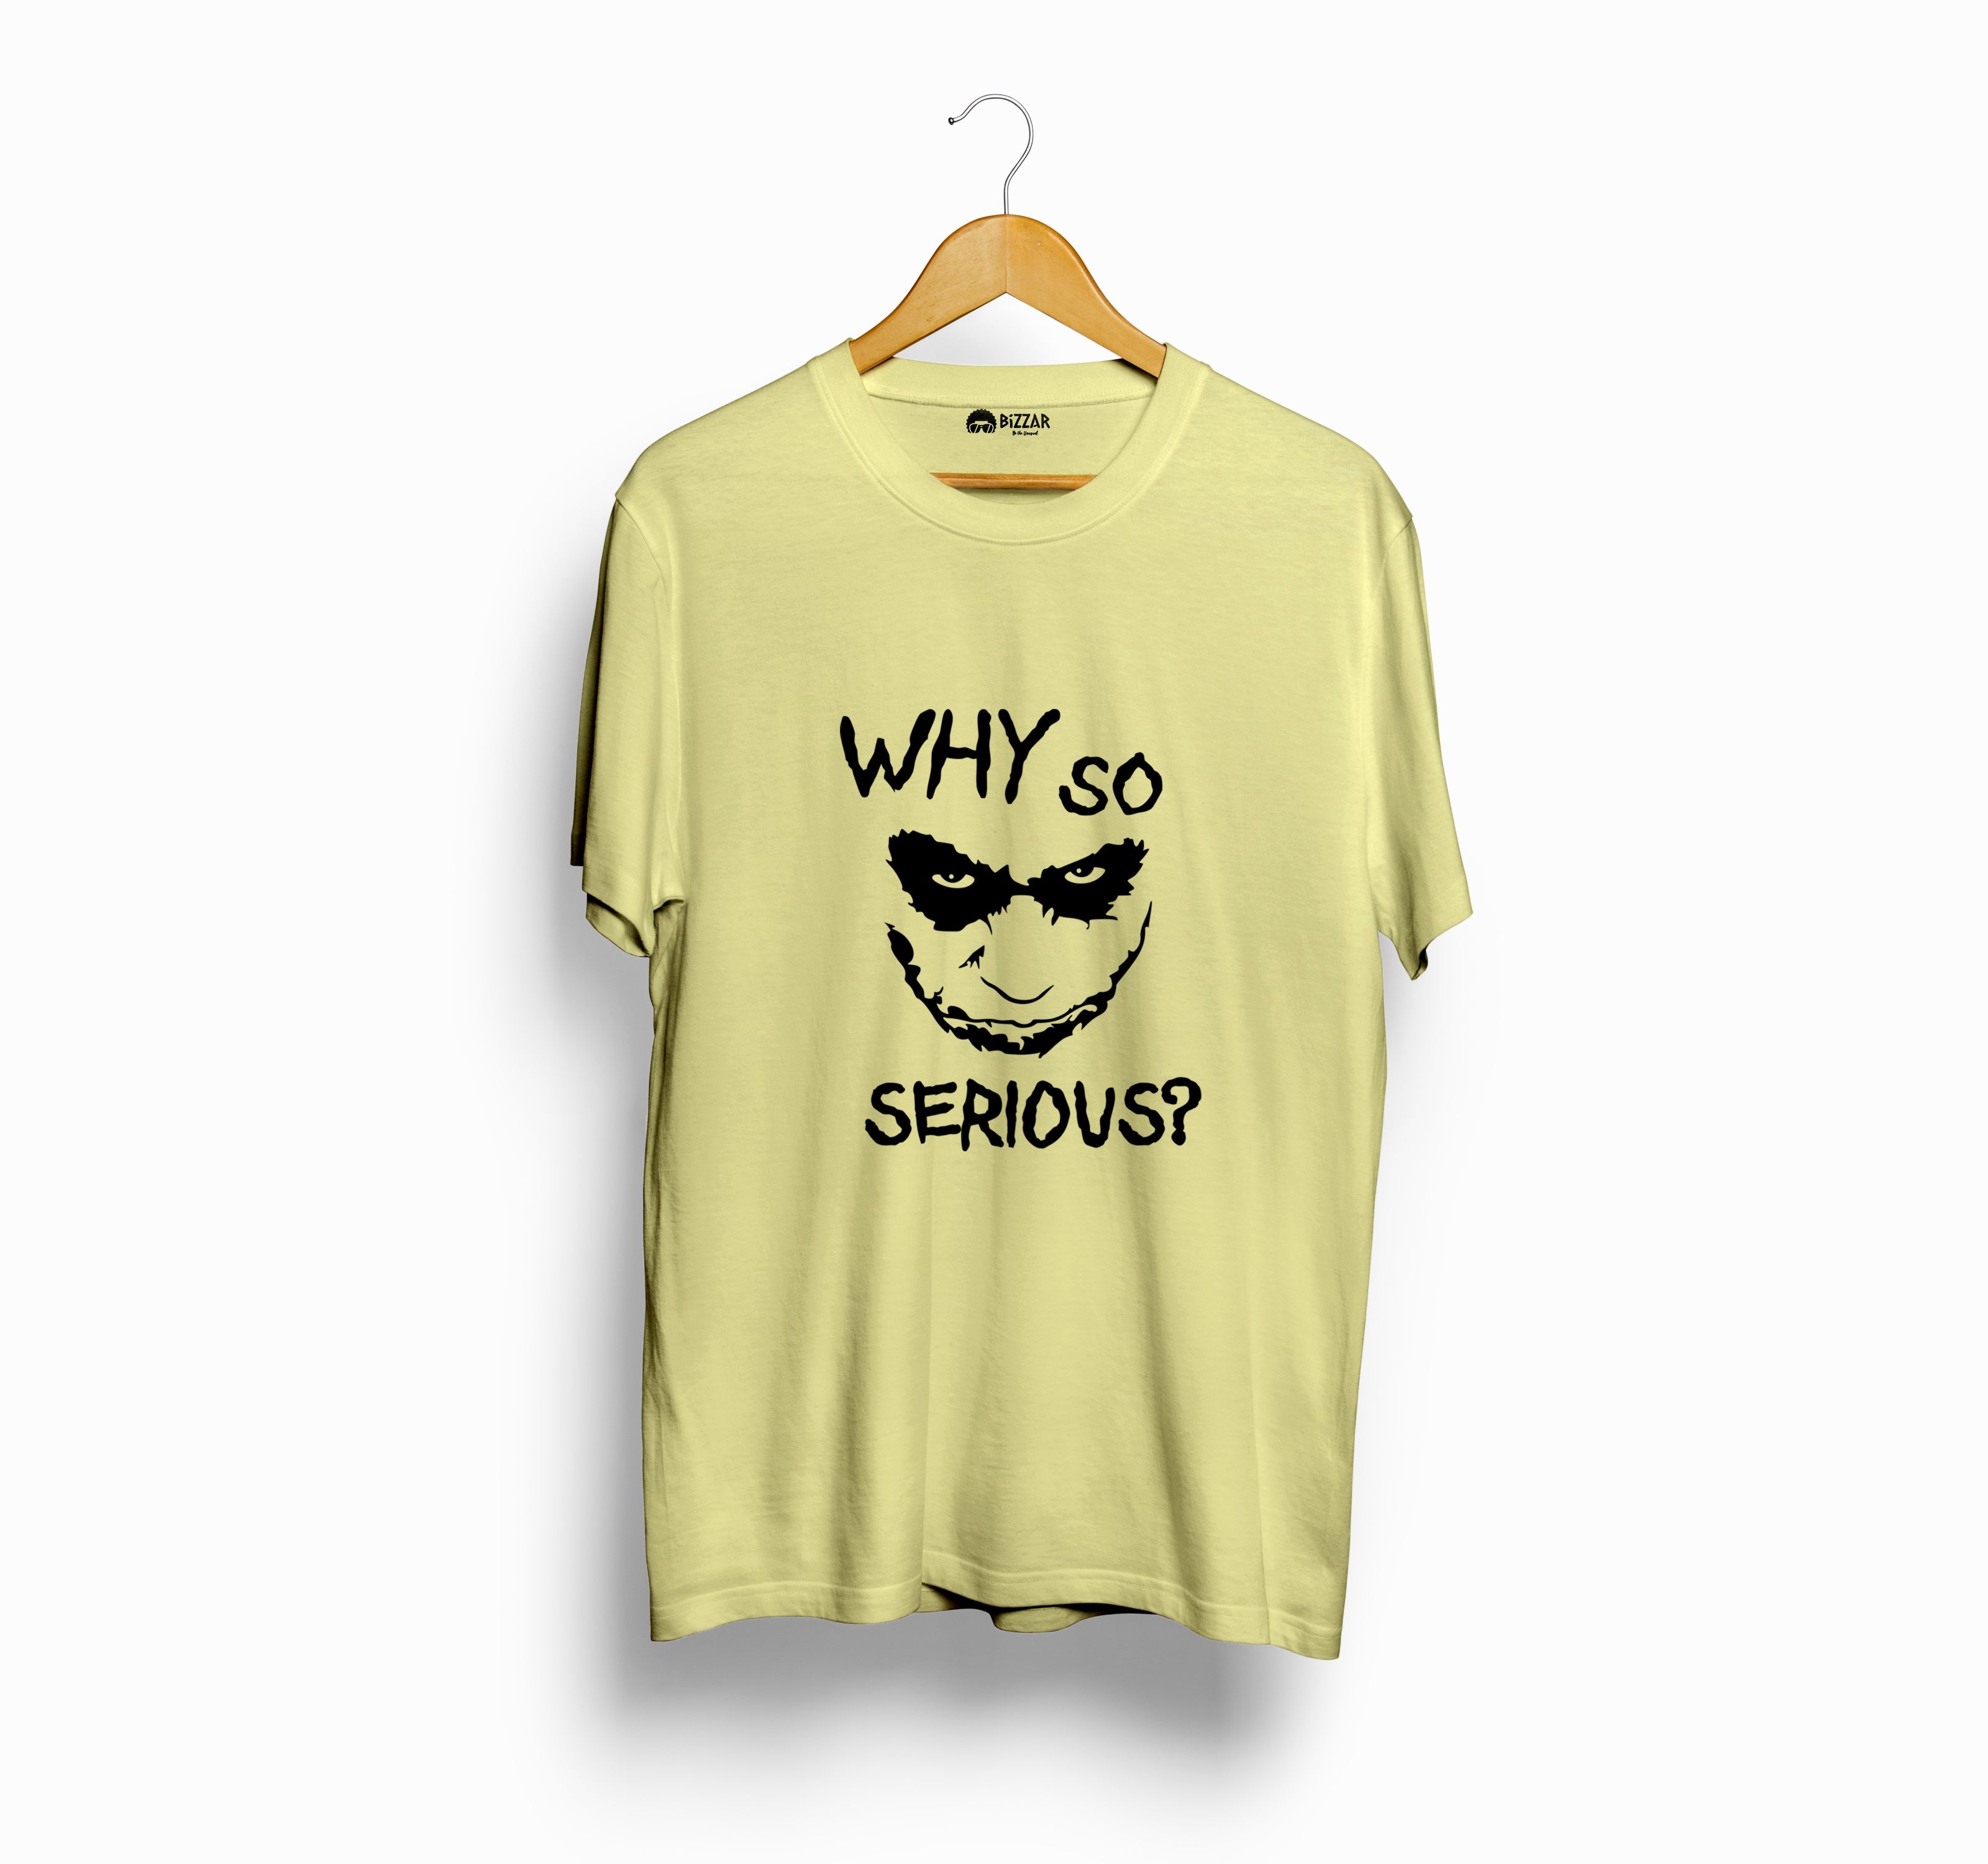 Bizzar's Why So Serious Butter Yellow T-Shirt